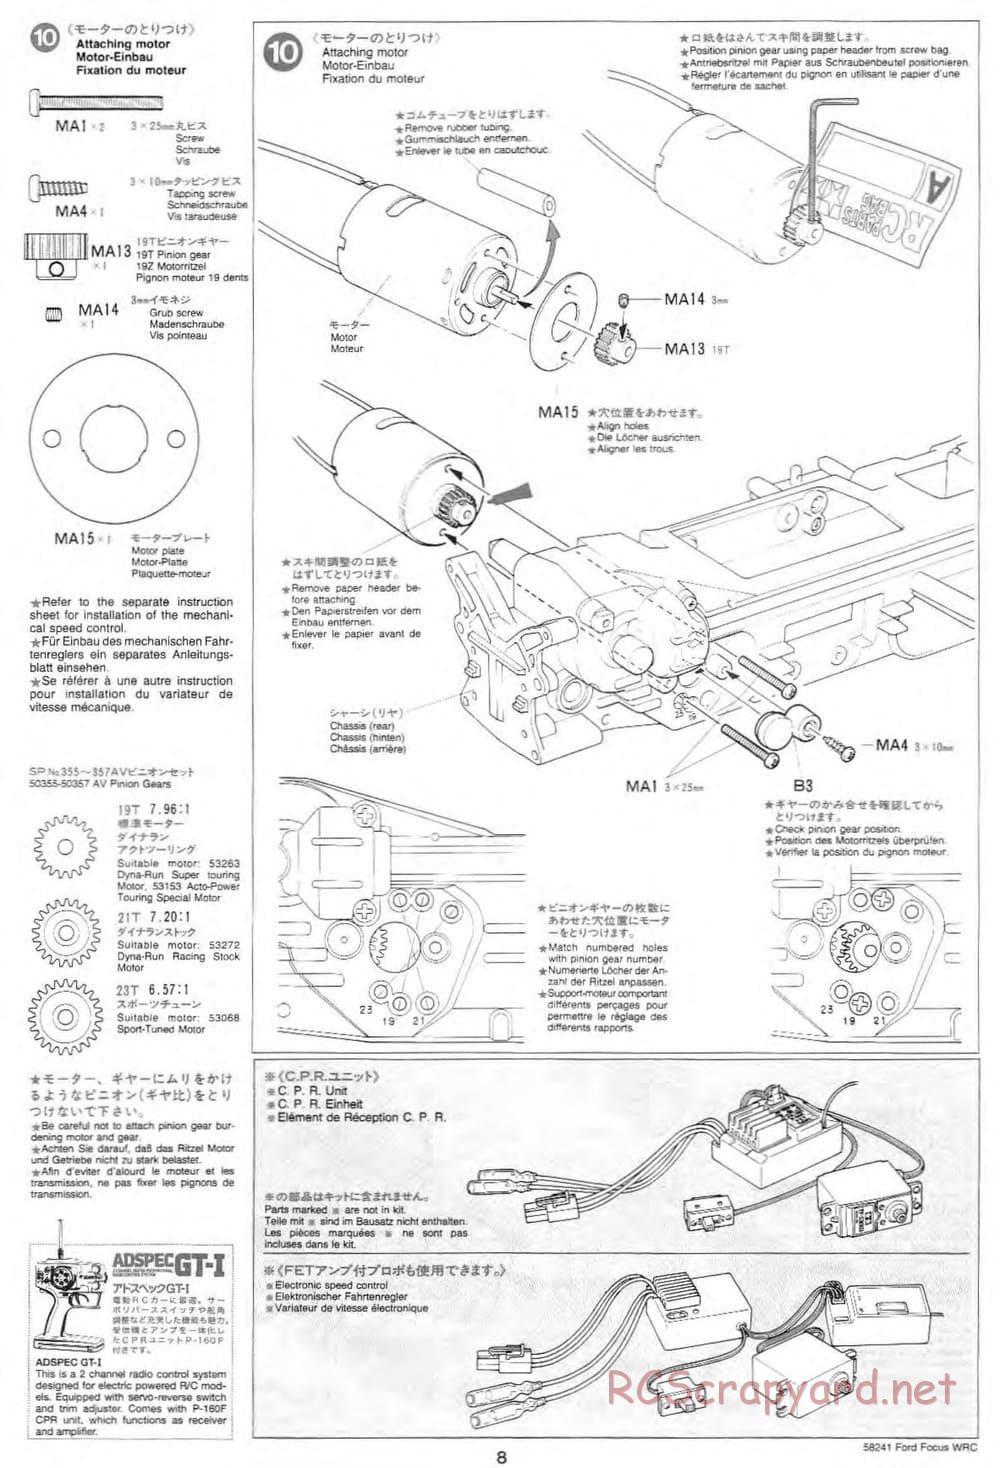 Tamiya - Ford Focus WRC - TL-01 Chassis - Manual - Page 8